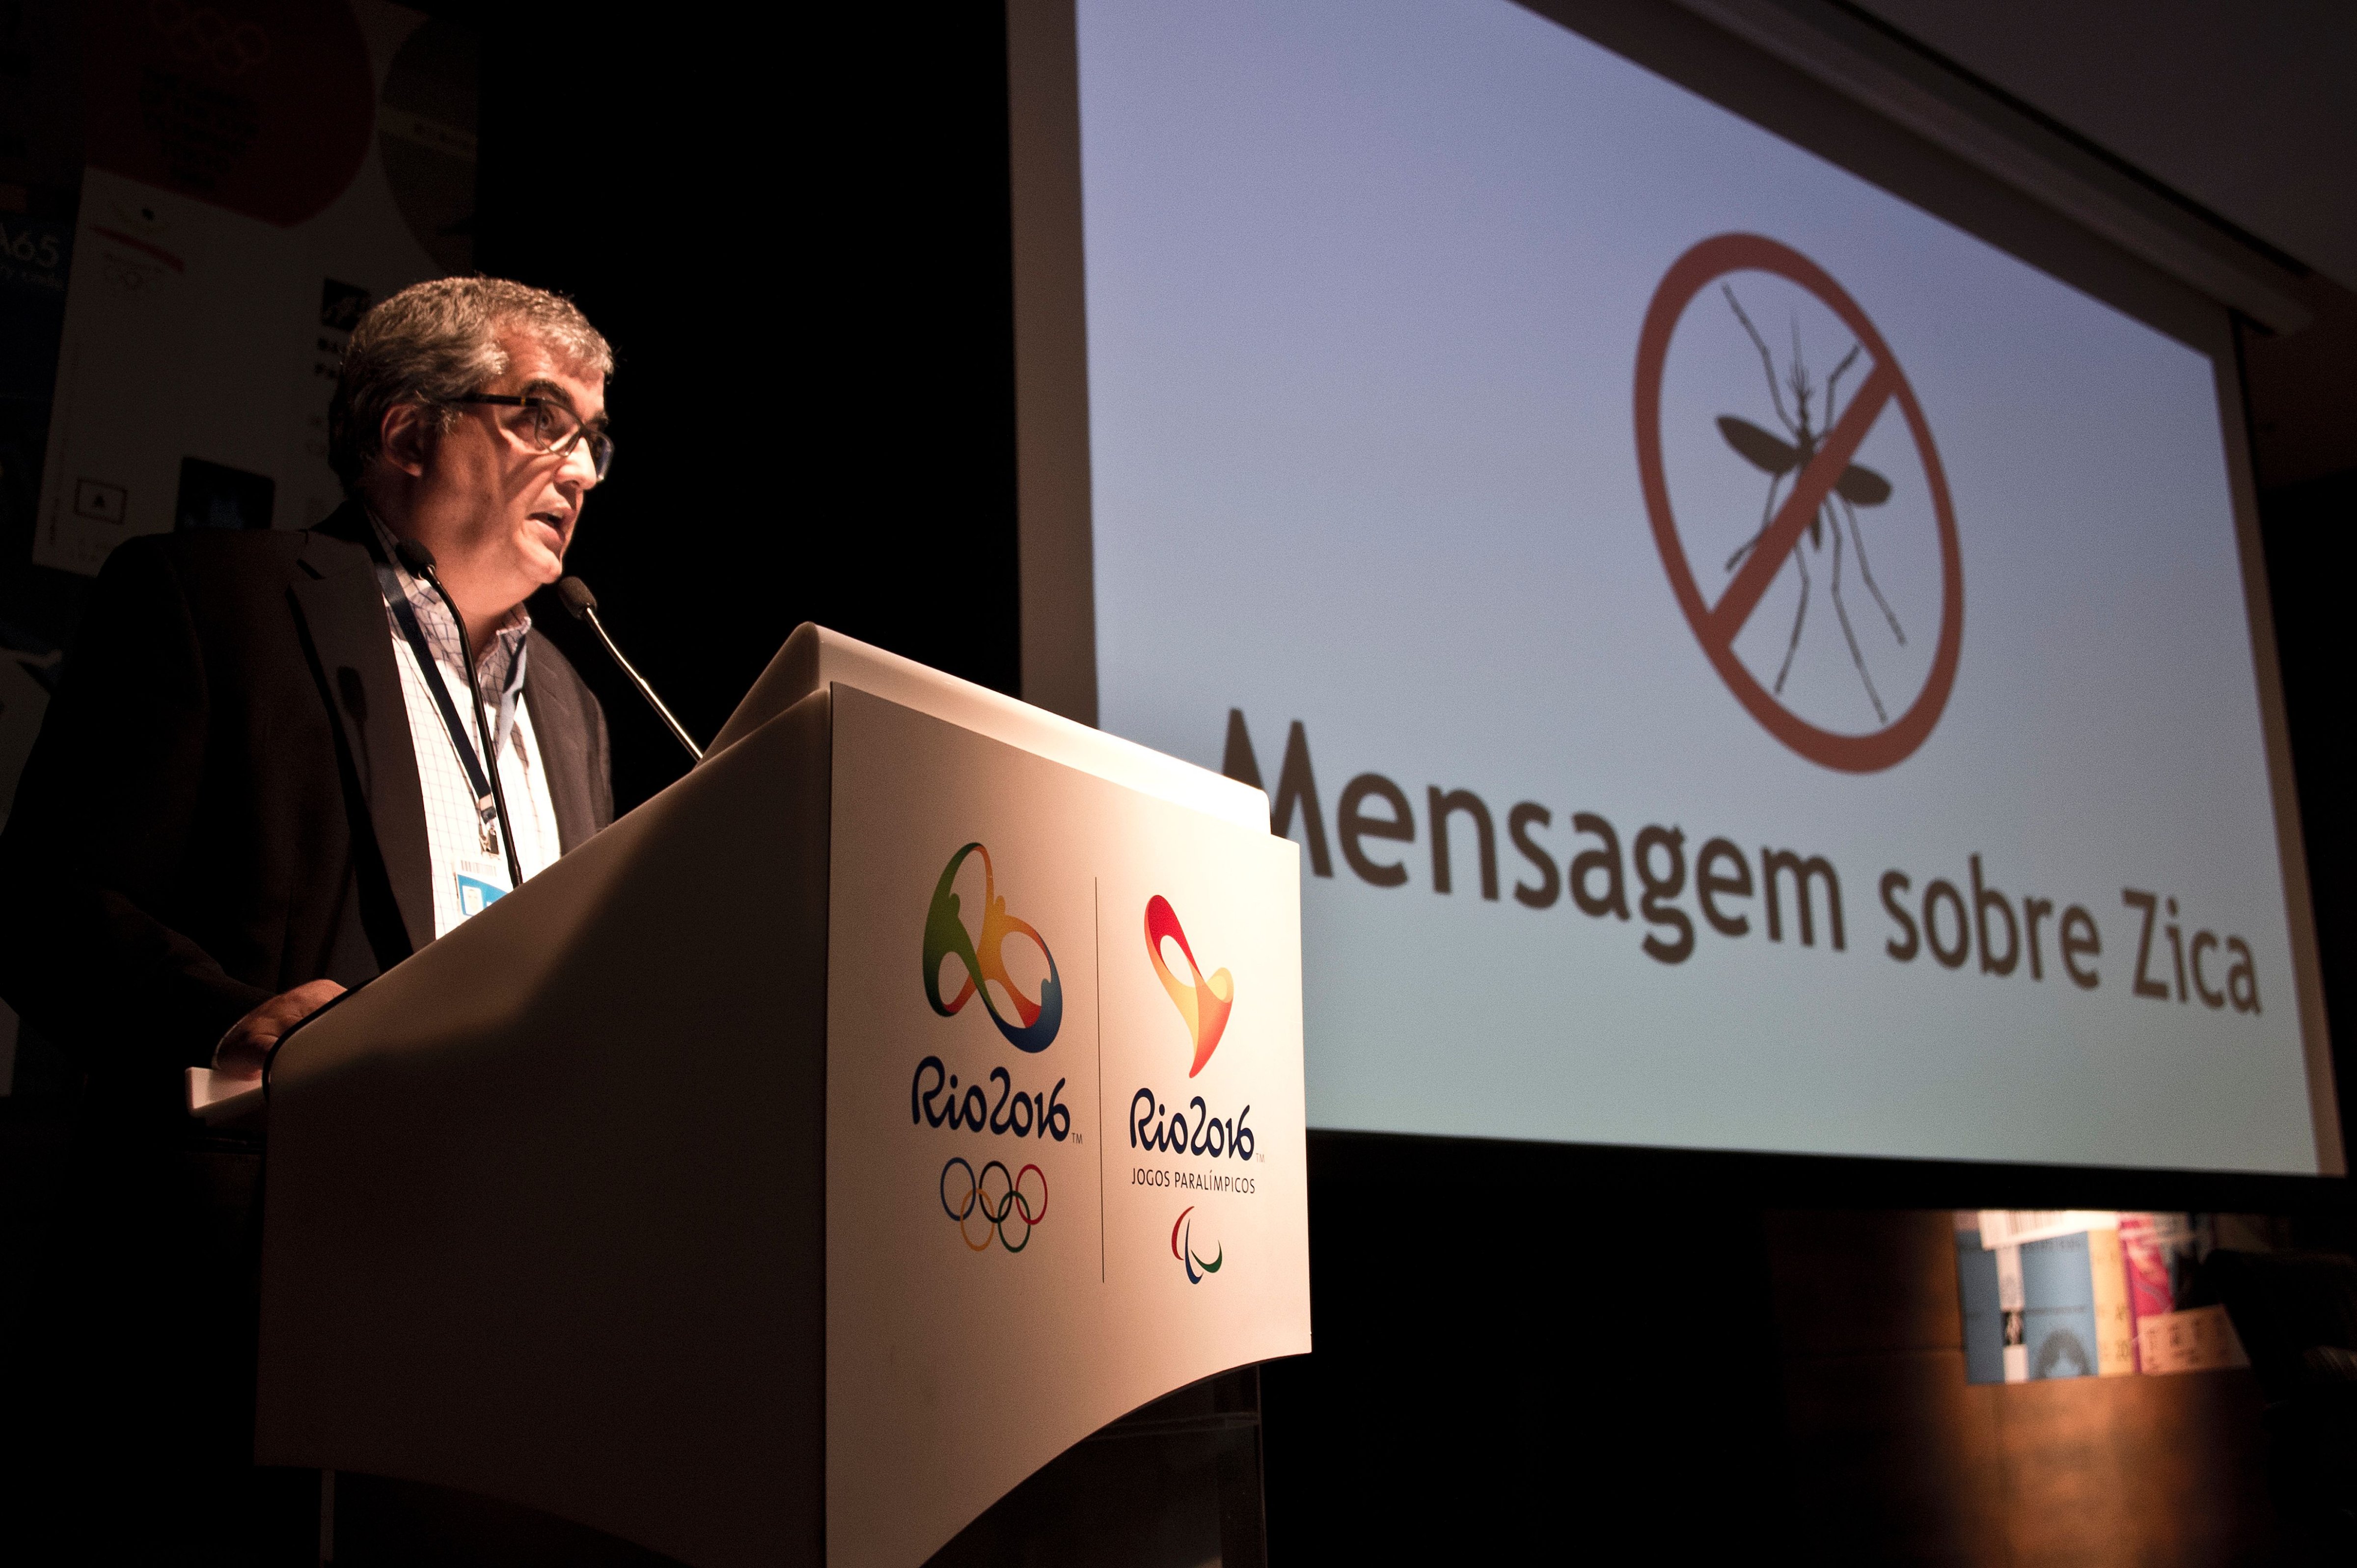 2016 Olympic Games press conference discusses the concerns of the Zika virus outbreak in Rio de Janeiro, Brazil on Feb. 2, 2016. (Vanderlei Almeida—AFP/Getty Images)